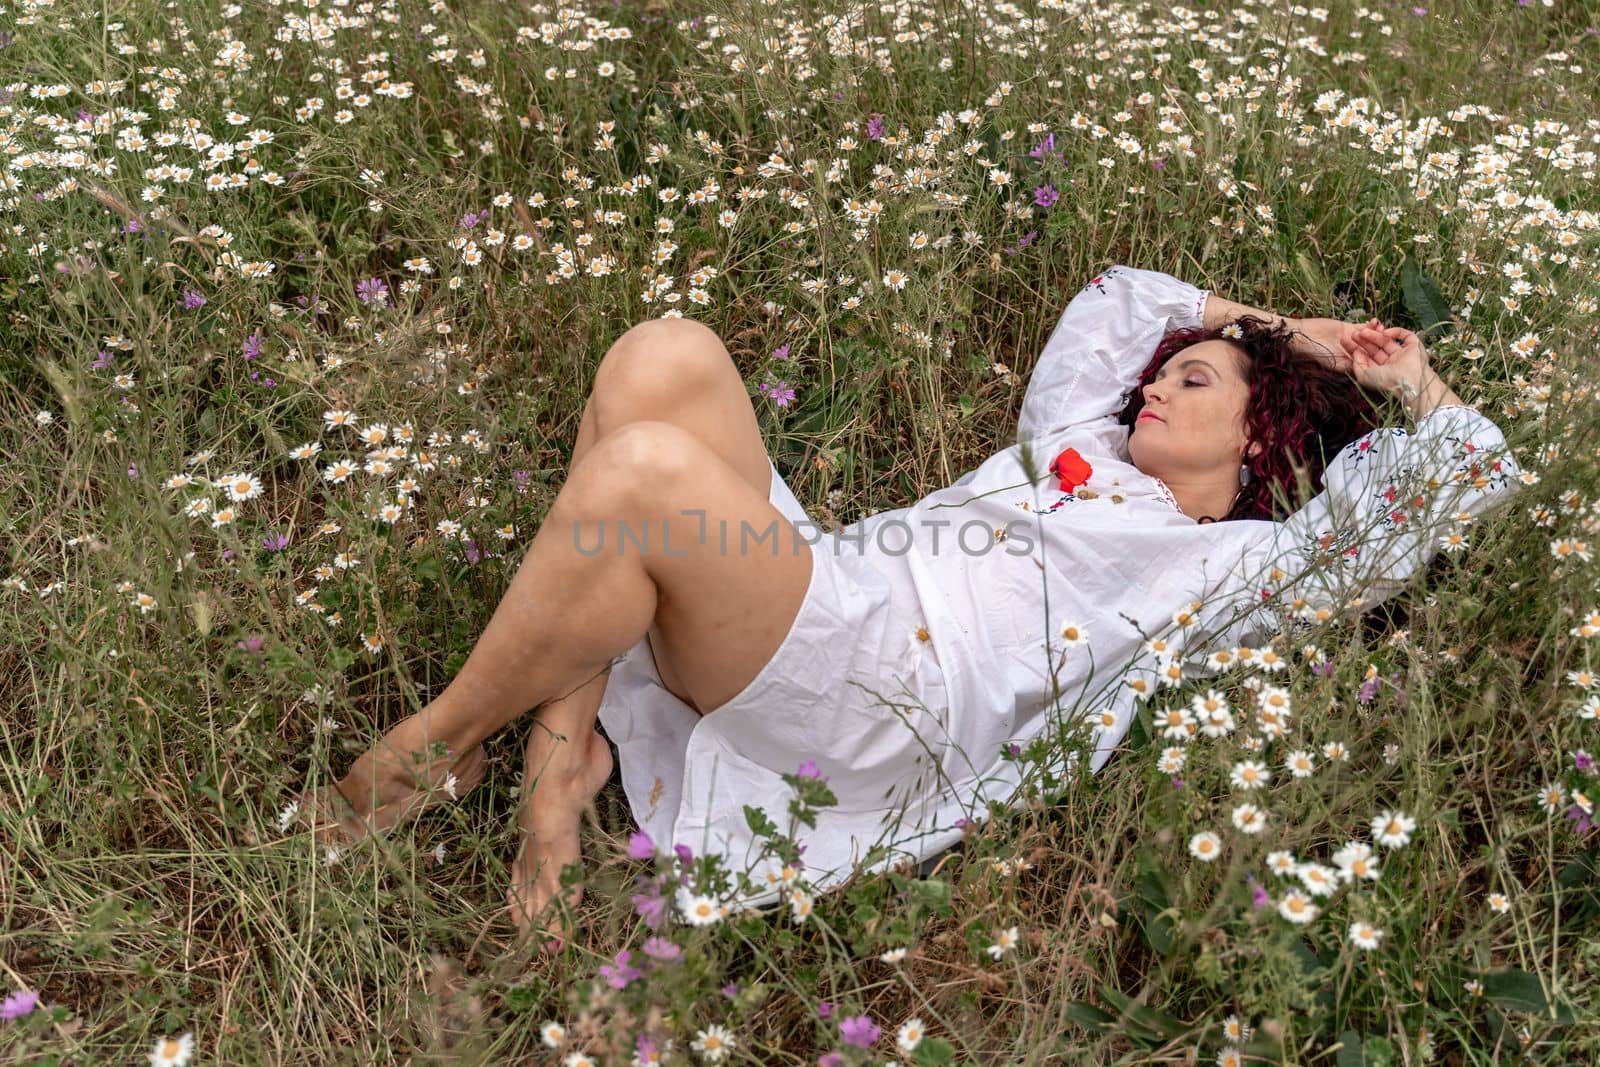 A beautiful woman lies on her back in a field and lifts up her beautiful legs. Good morning by Matiunina